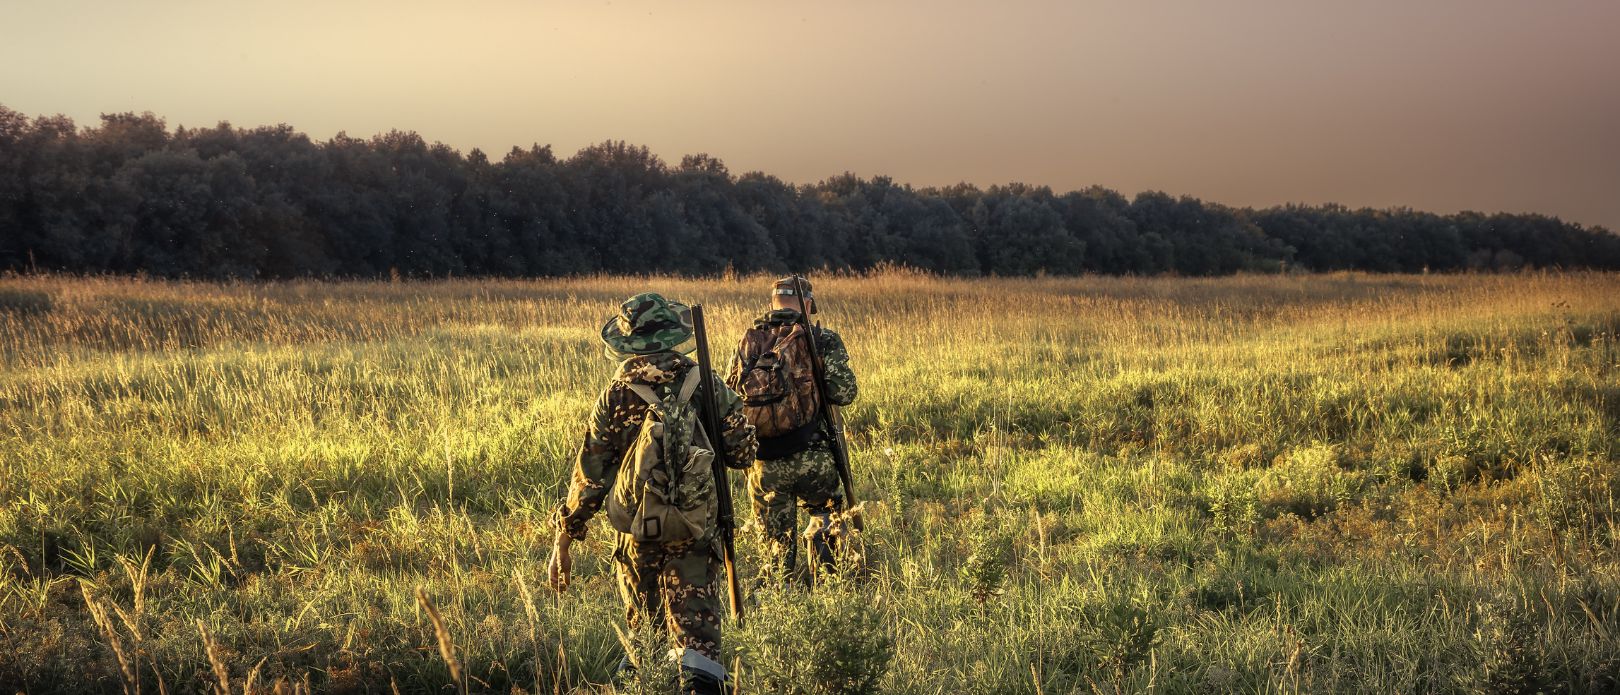 Hunters going through rural field towards forest at sunset during hunting season in countryside